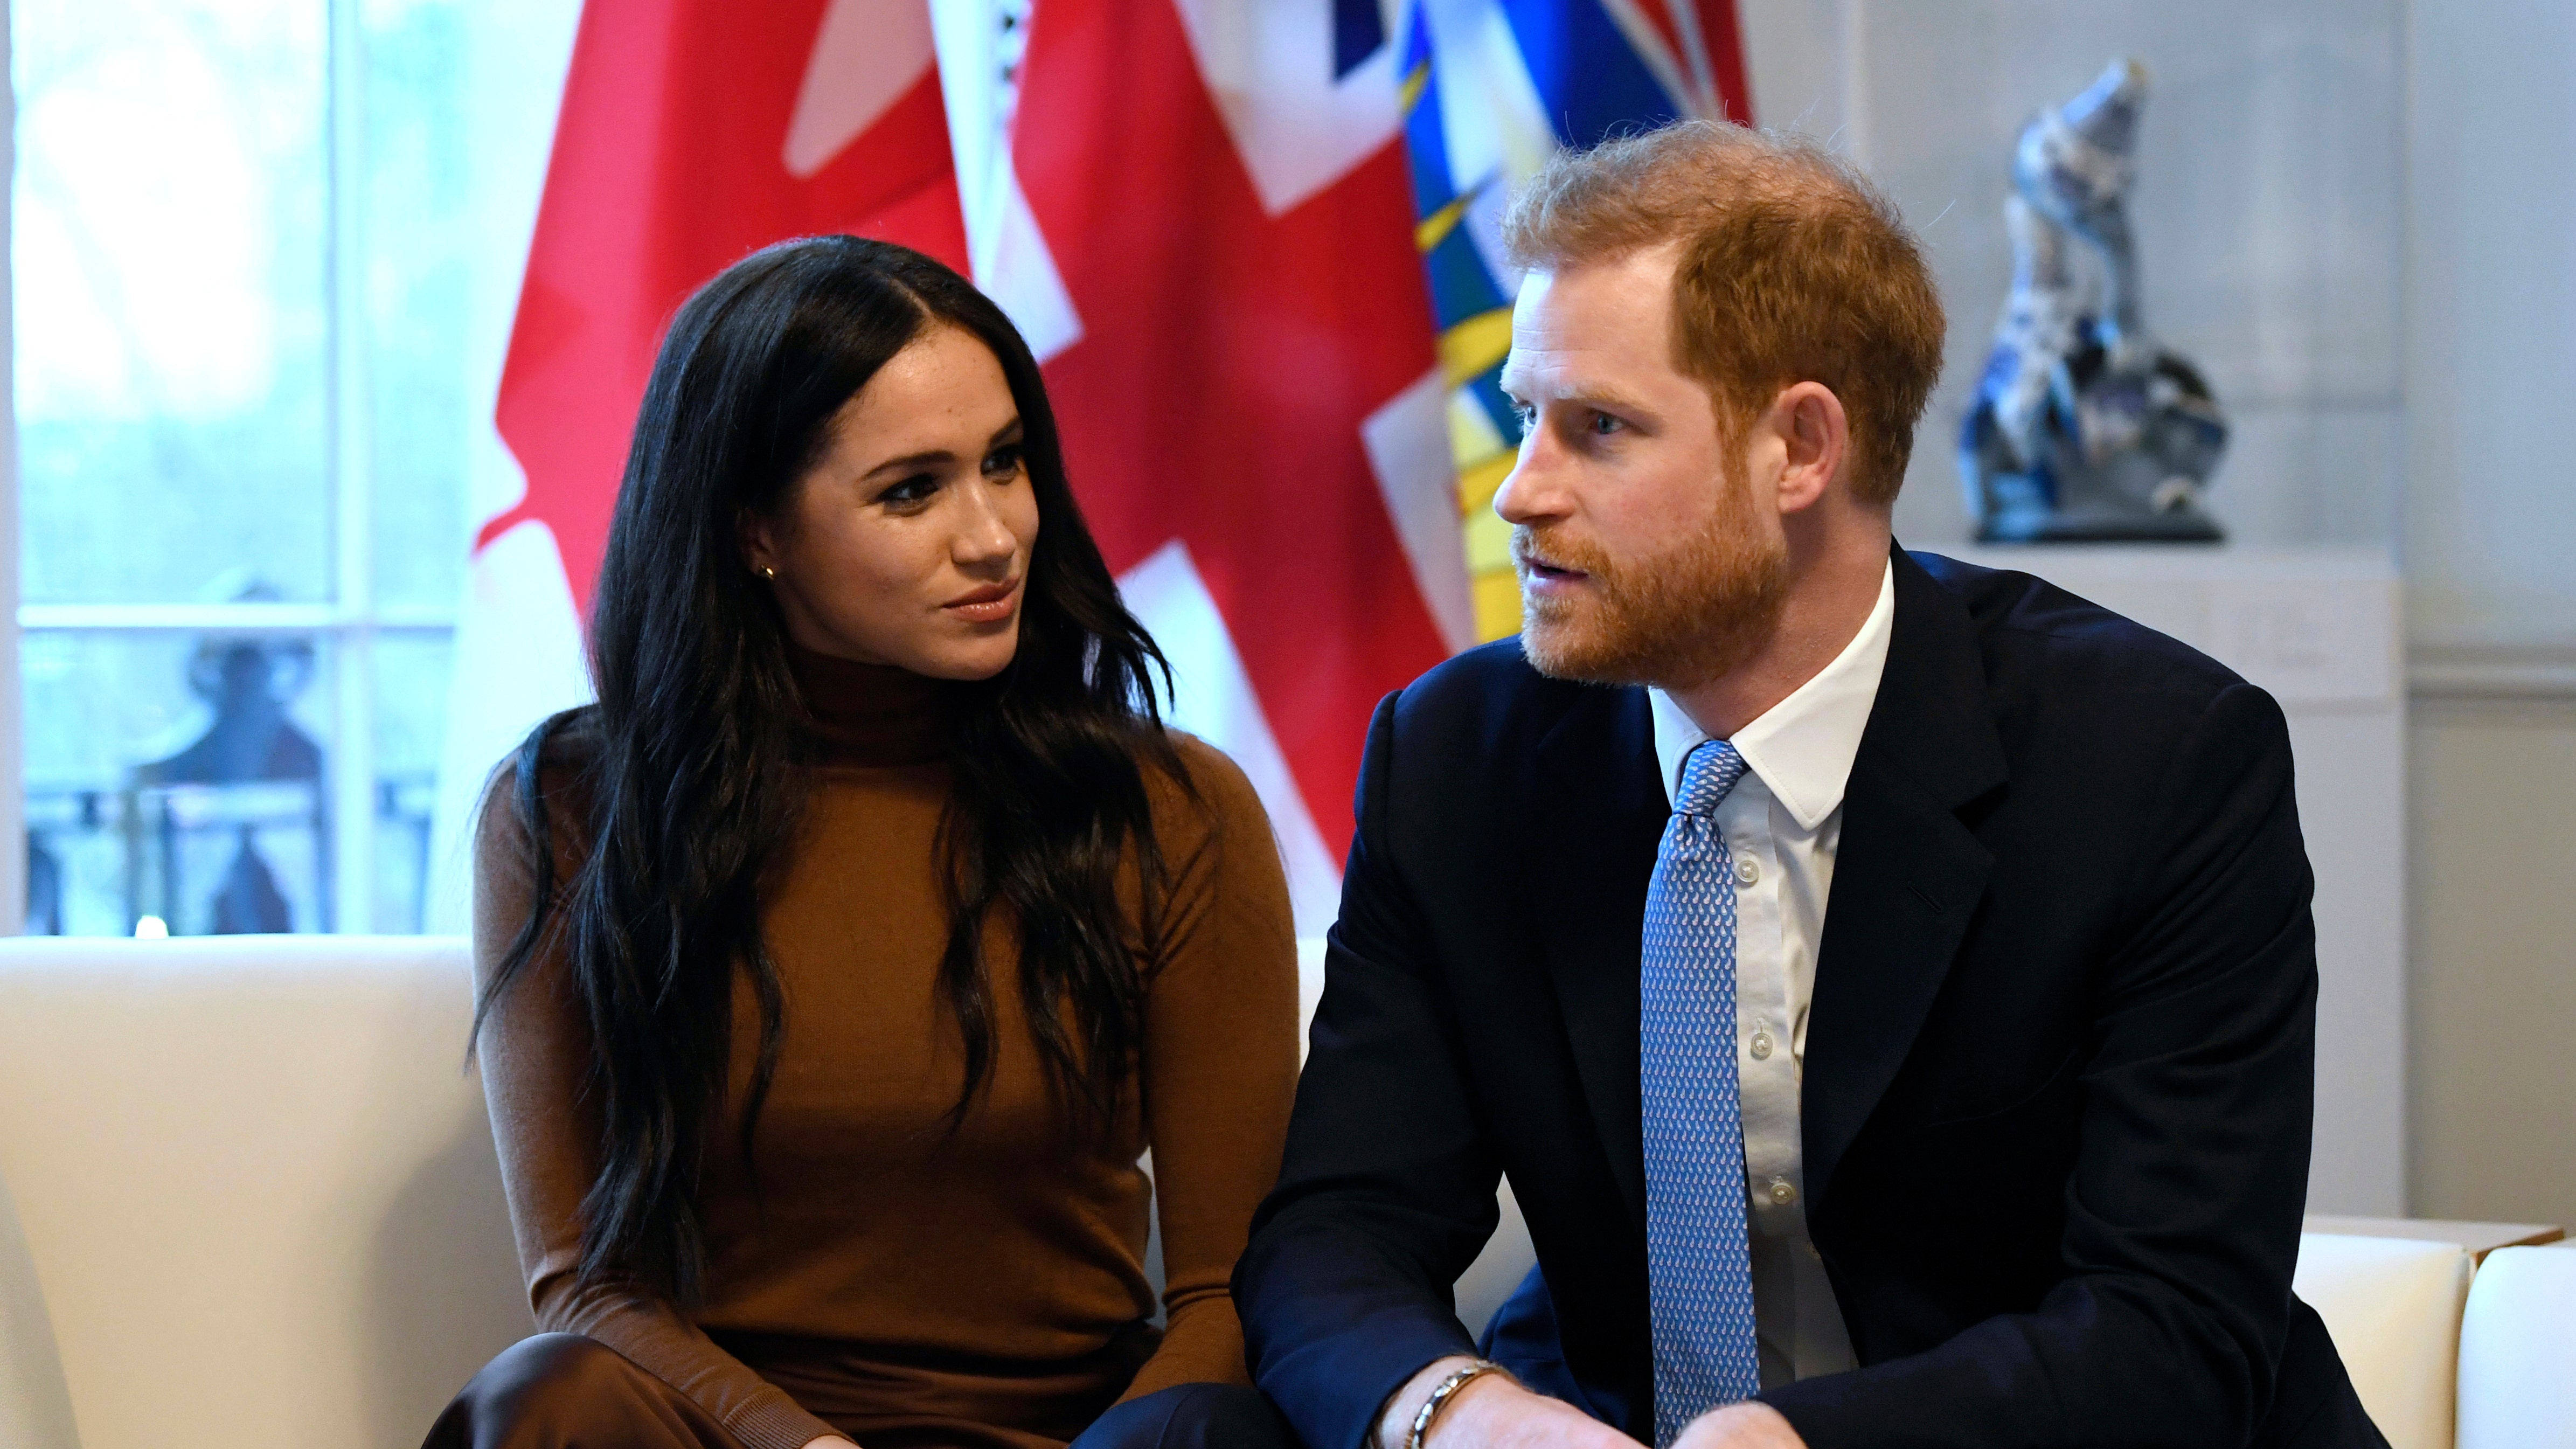 Prince Harry Meghan Markle face backlash for ‘strange’ Time magazine cover: ‘They look CGI’ – Fox News